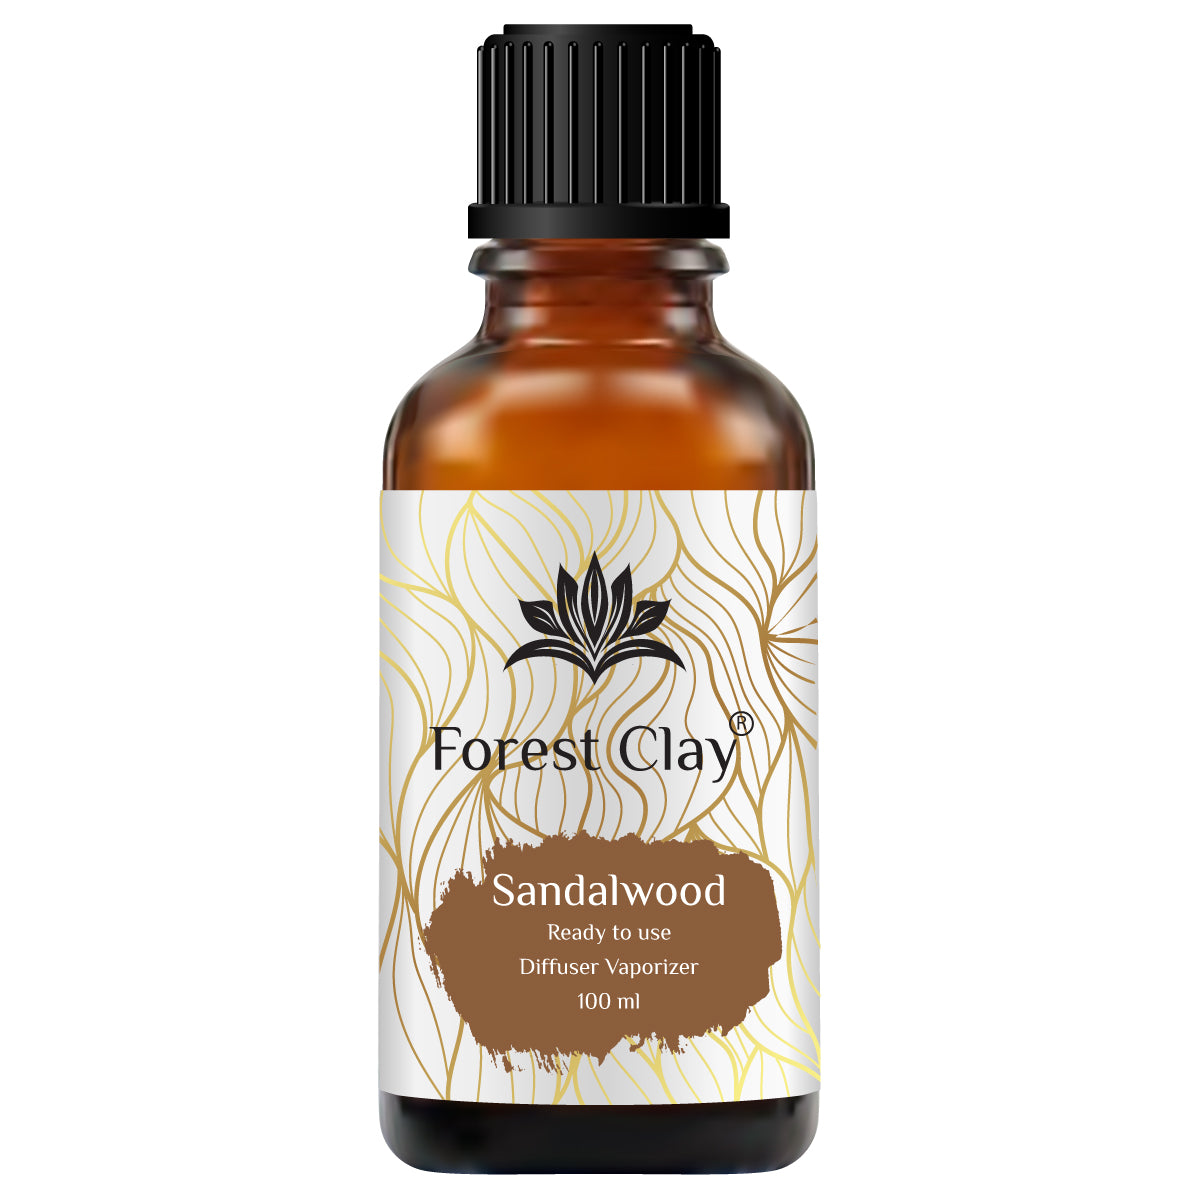 Sandalwood Ready to Use Diffuser Vaporizer Oil